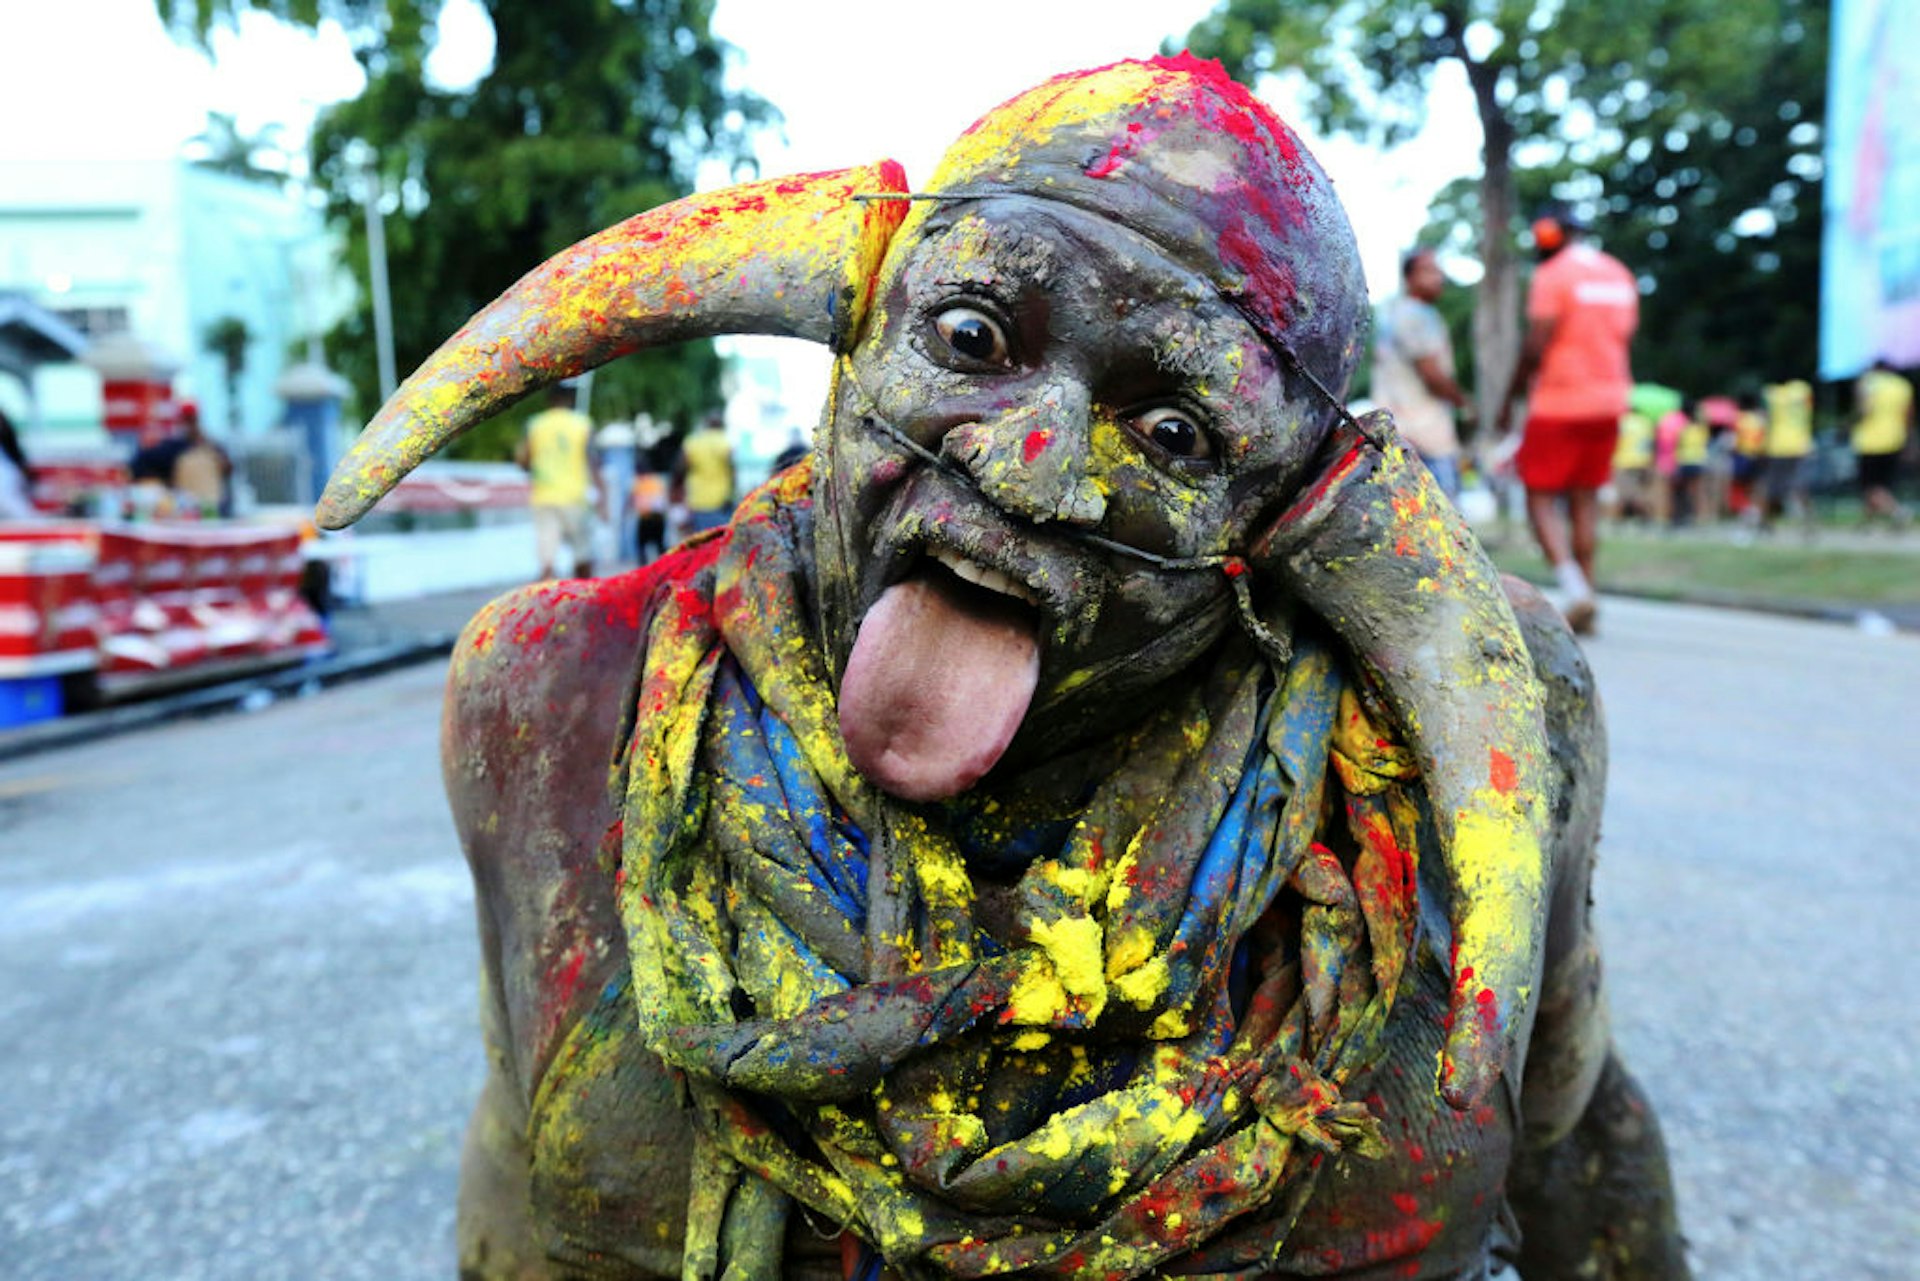 A carnival reveler with his face covered in paint and wearing horns poses for a portrait during the J'ouvert street procession as part of Trinidad Carnival